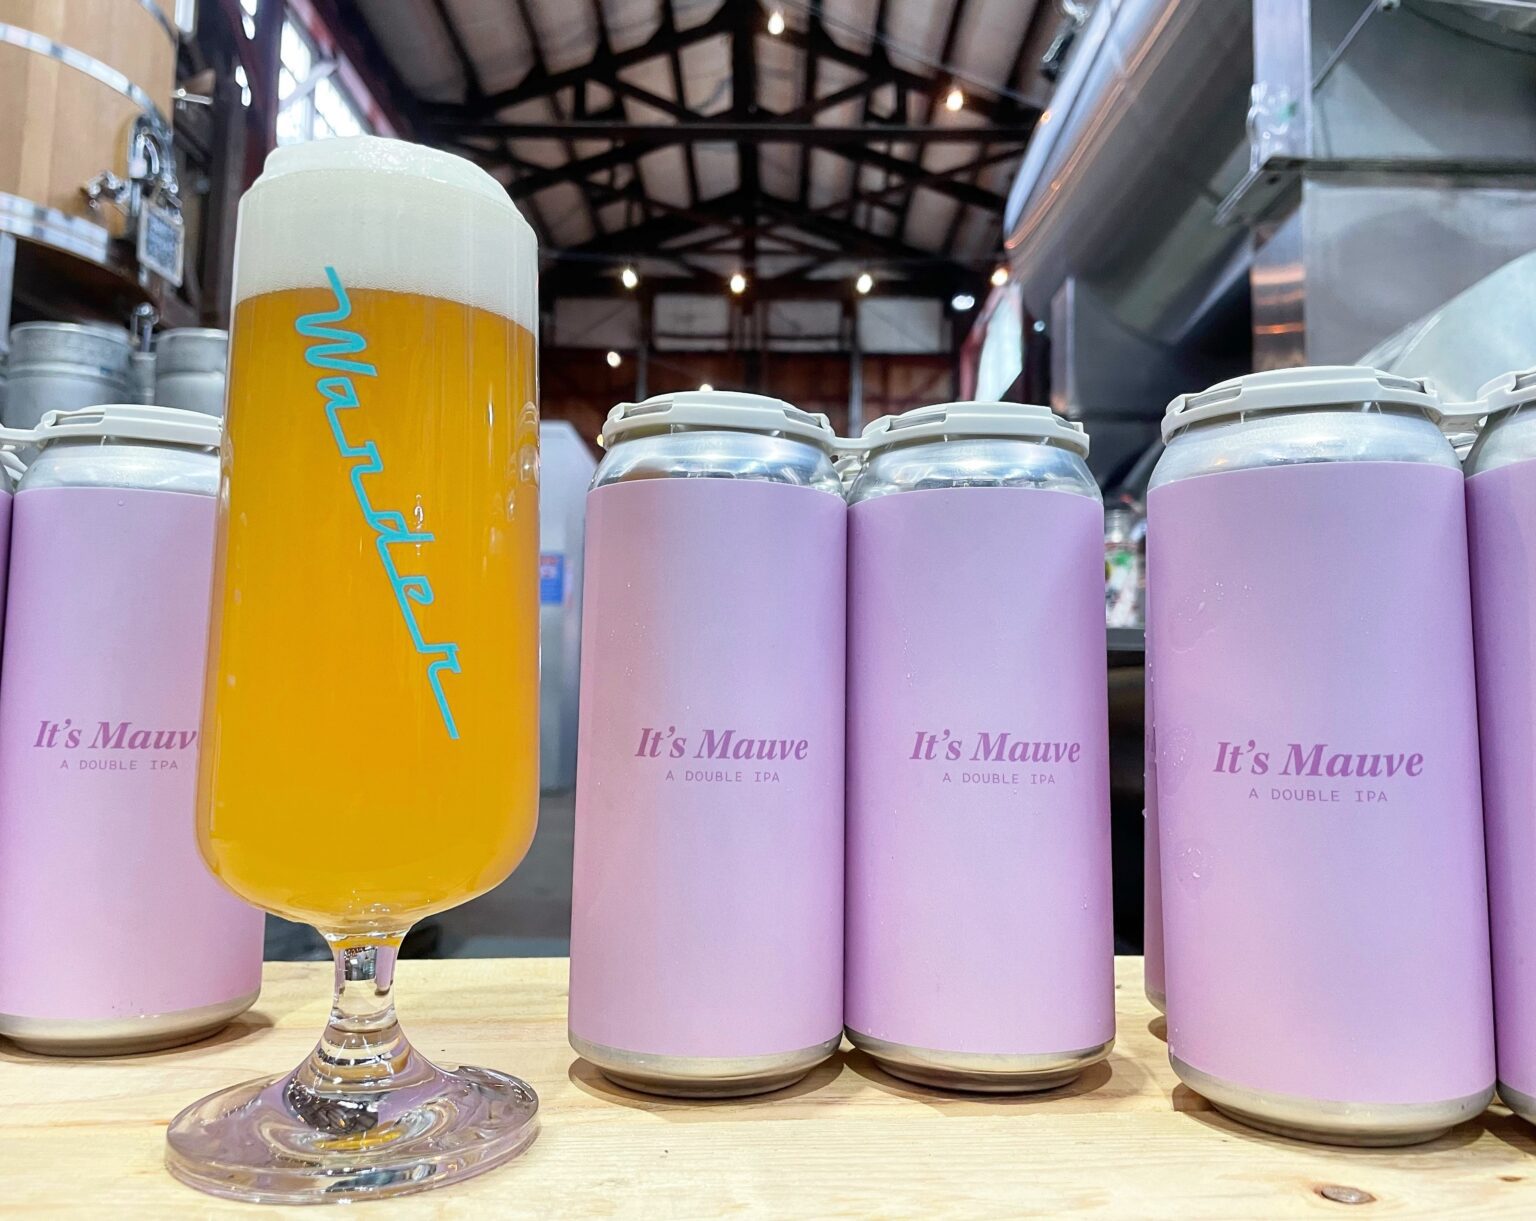 Wander Brewing has released It’s Mauve